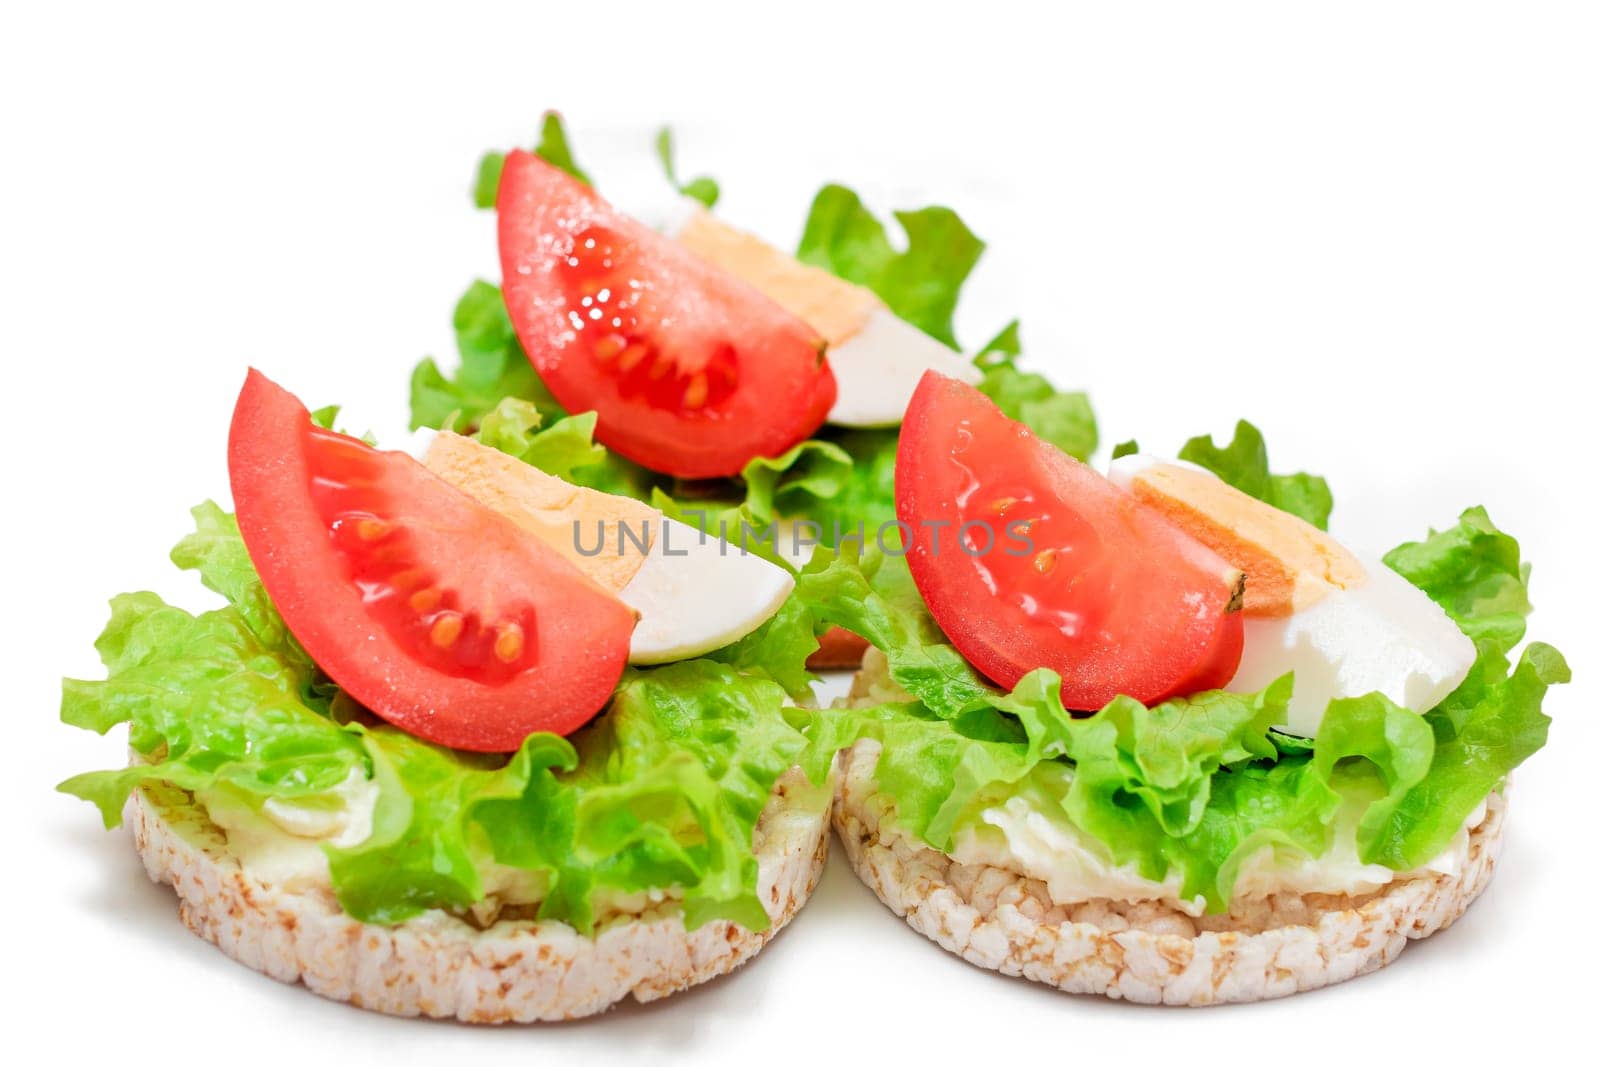 Rice Cake Sandwiches with Tomato, Lettuce and Egg - Isolated by InfinitumProdux